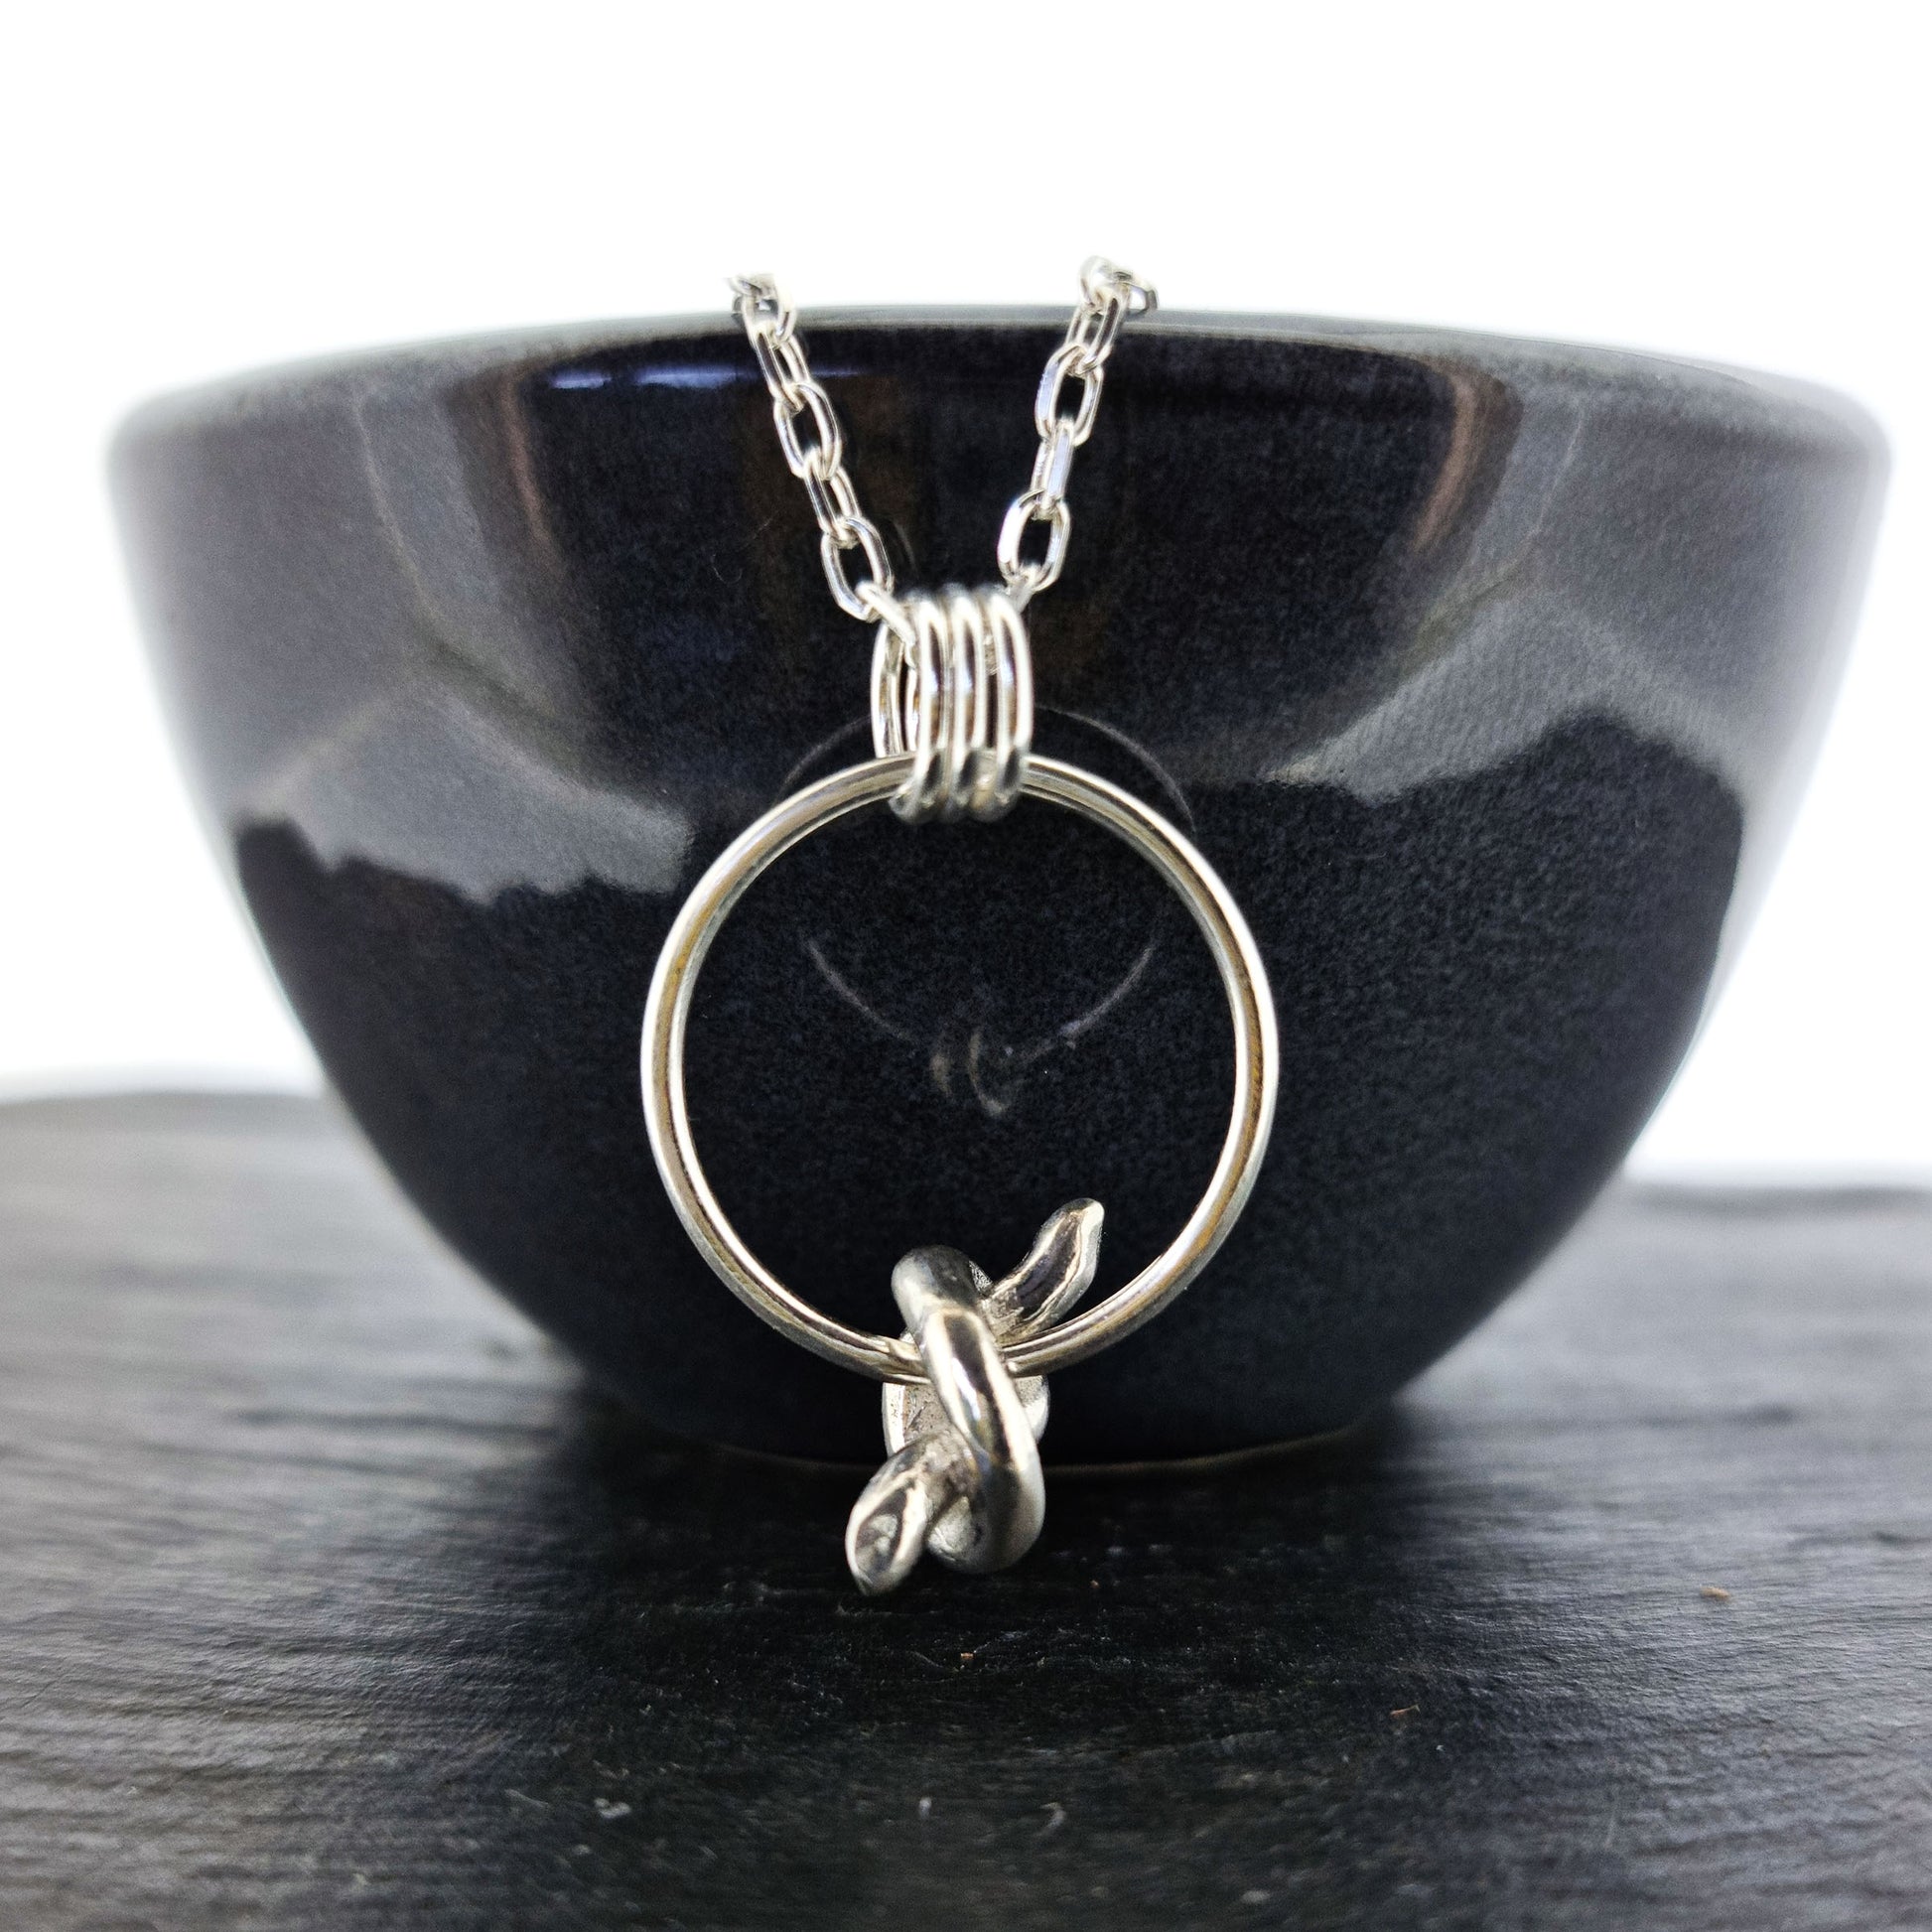 Silver circle pendant with spinning knot charm and triple circle bail. Suspended on a silver chain. Pictured on a black bowl.